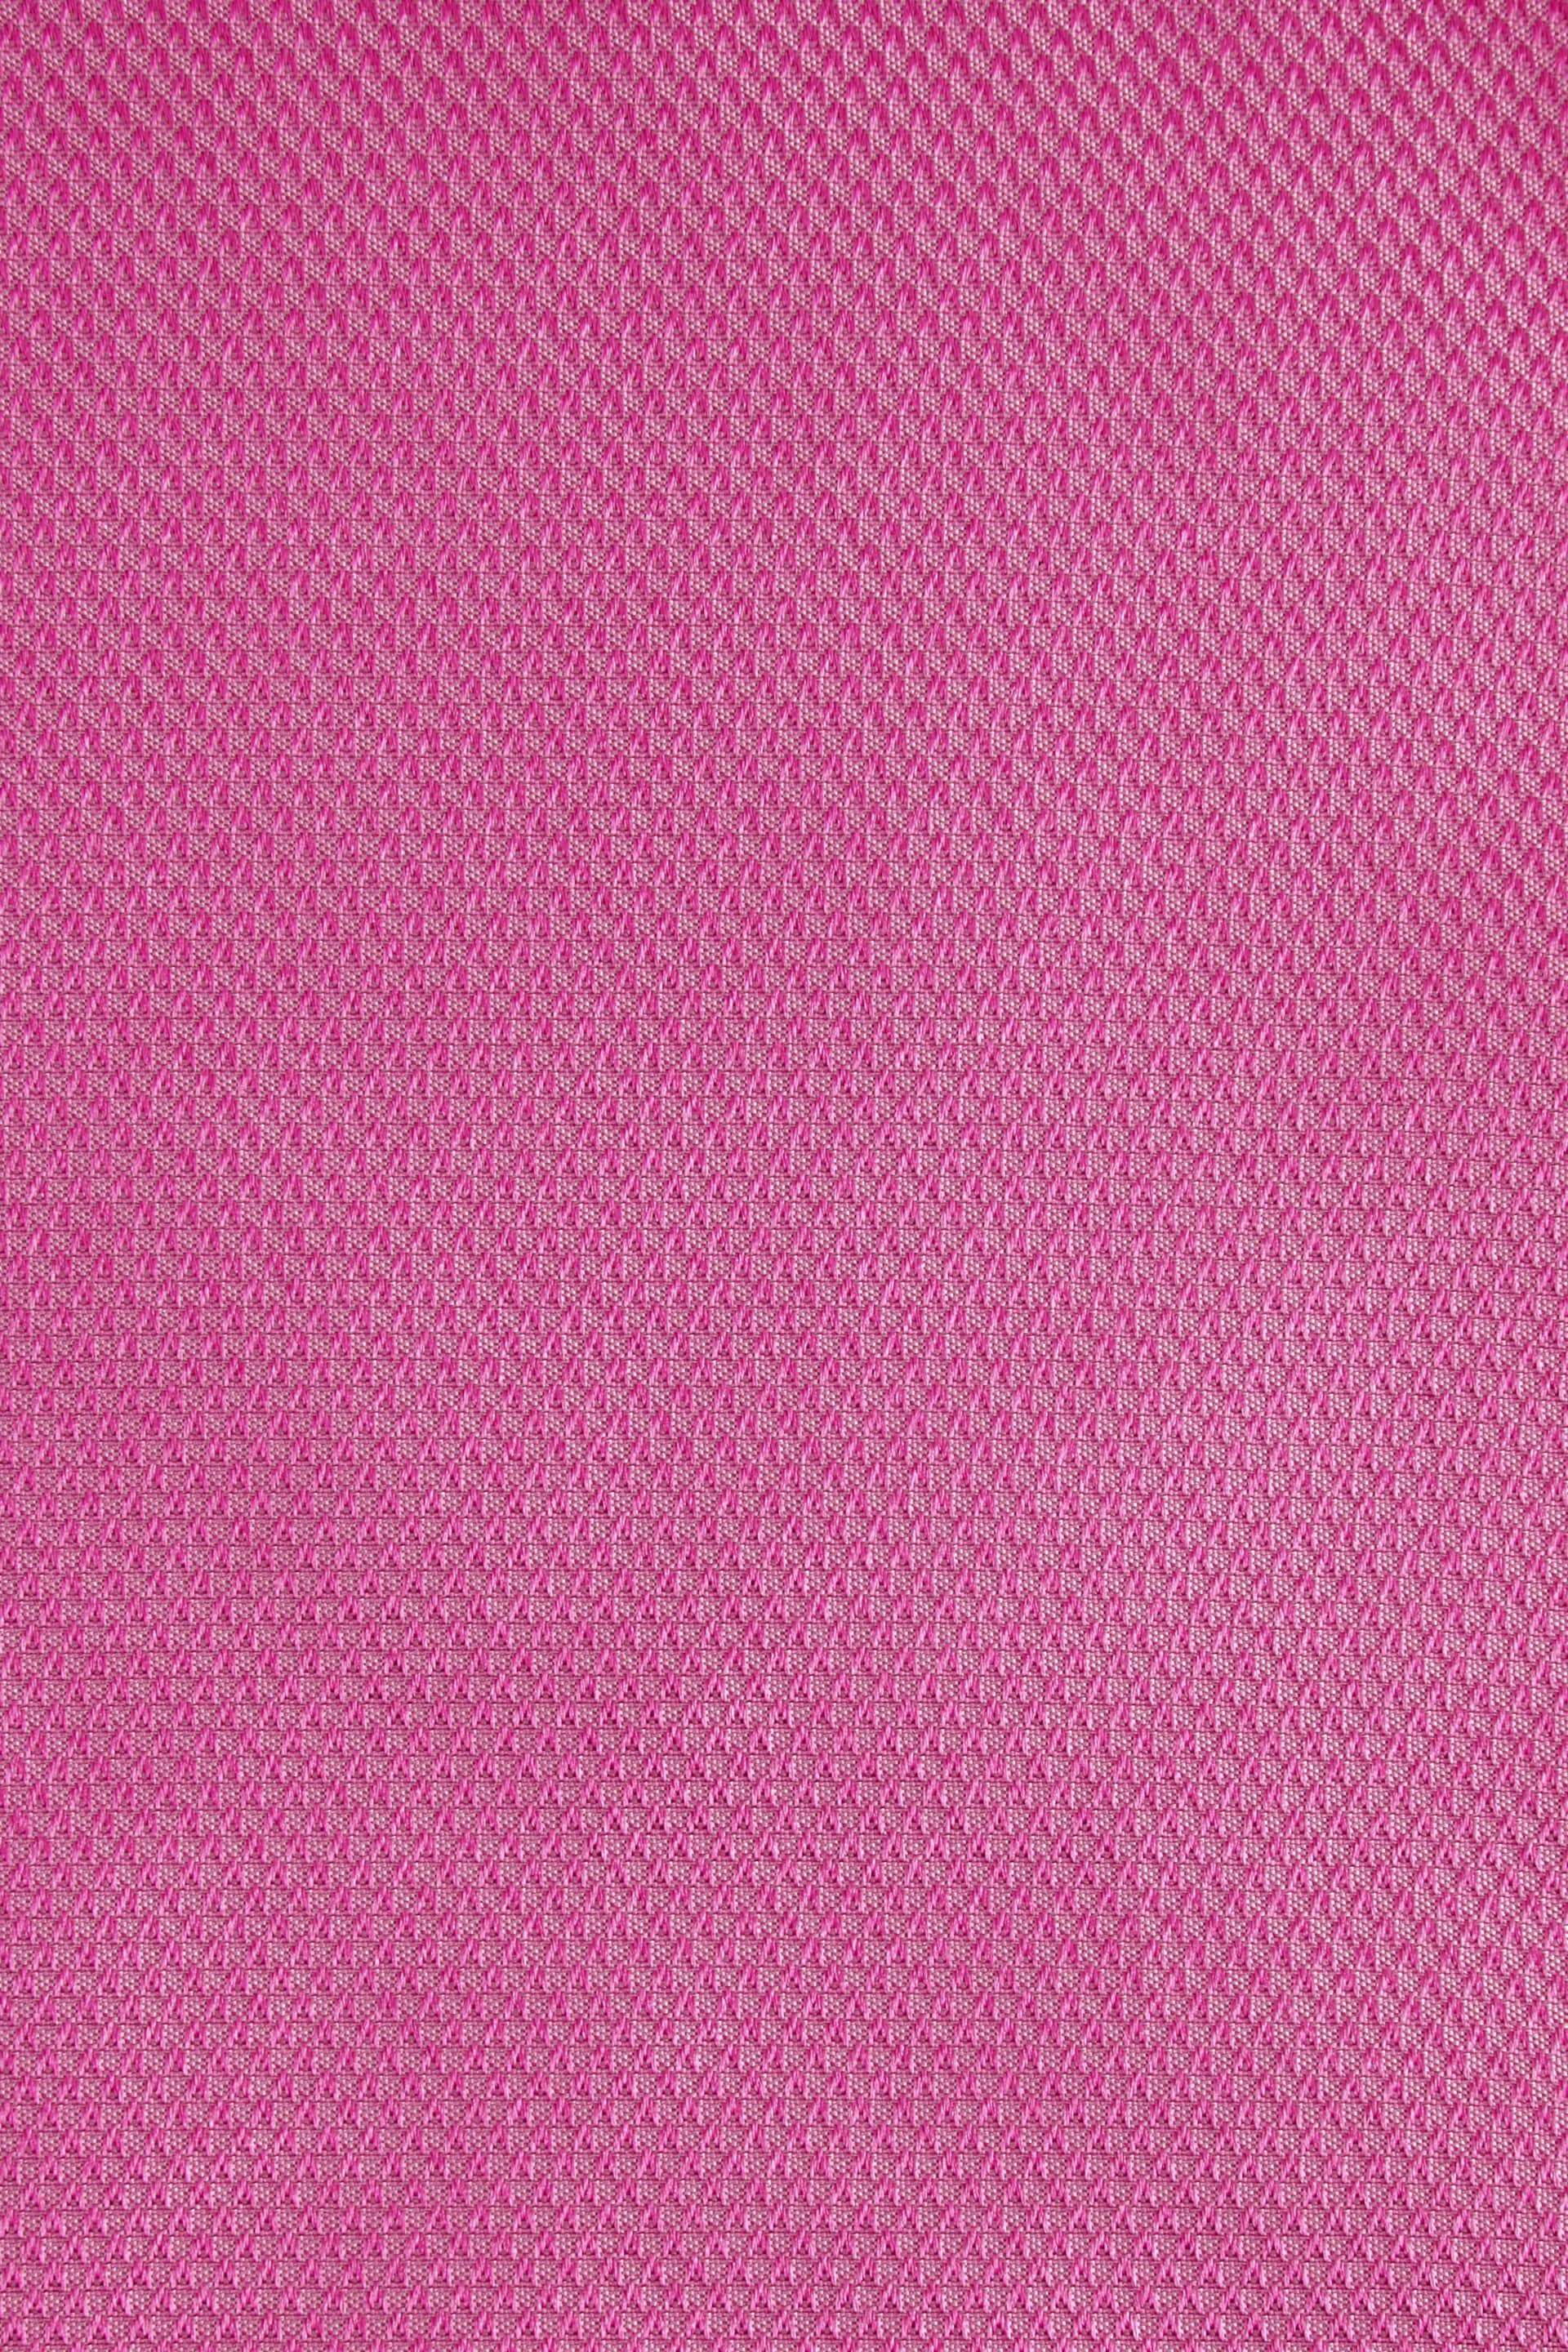 Fuchsia Pink Textured Silk Lapel Pin And Pocket Square Set - Image 4 of 4